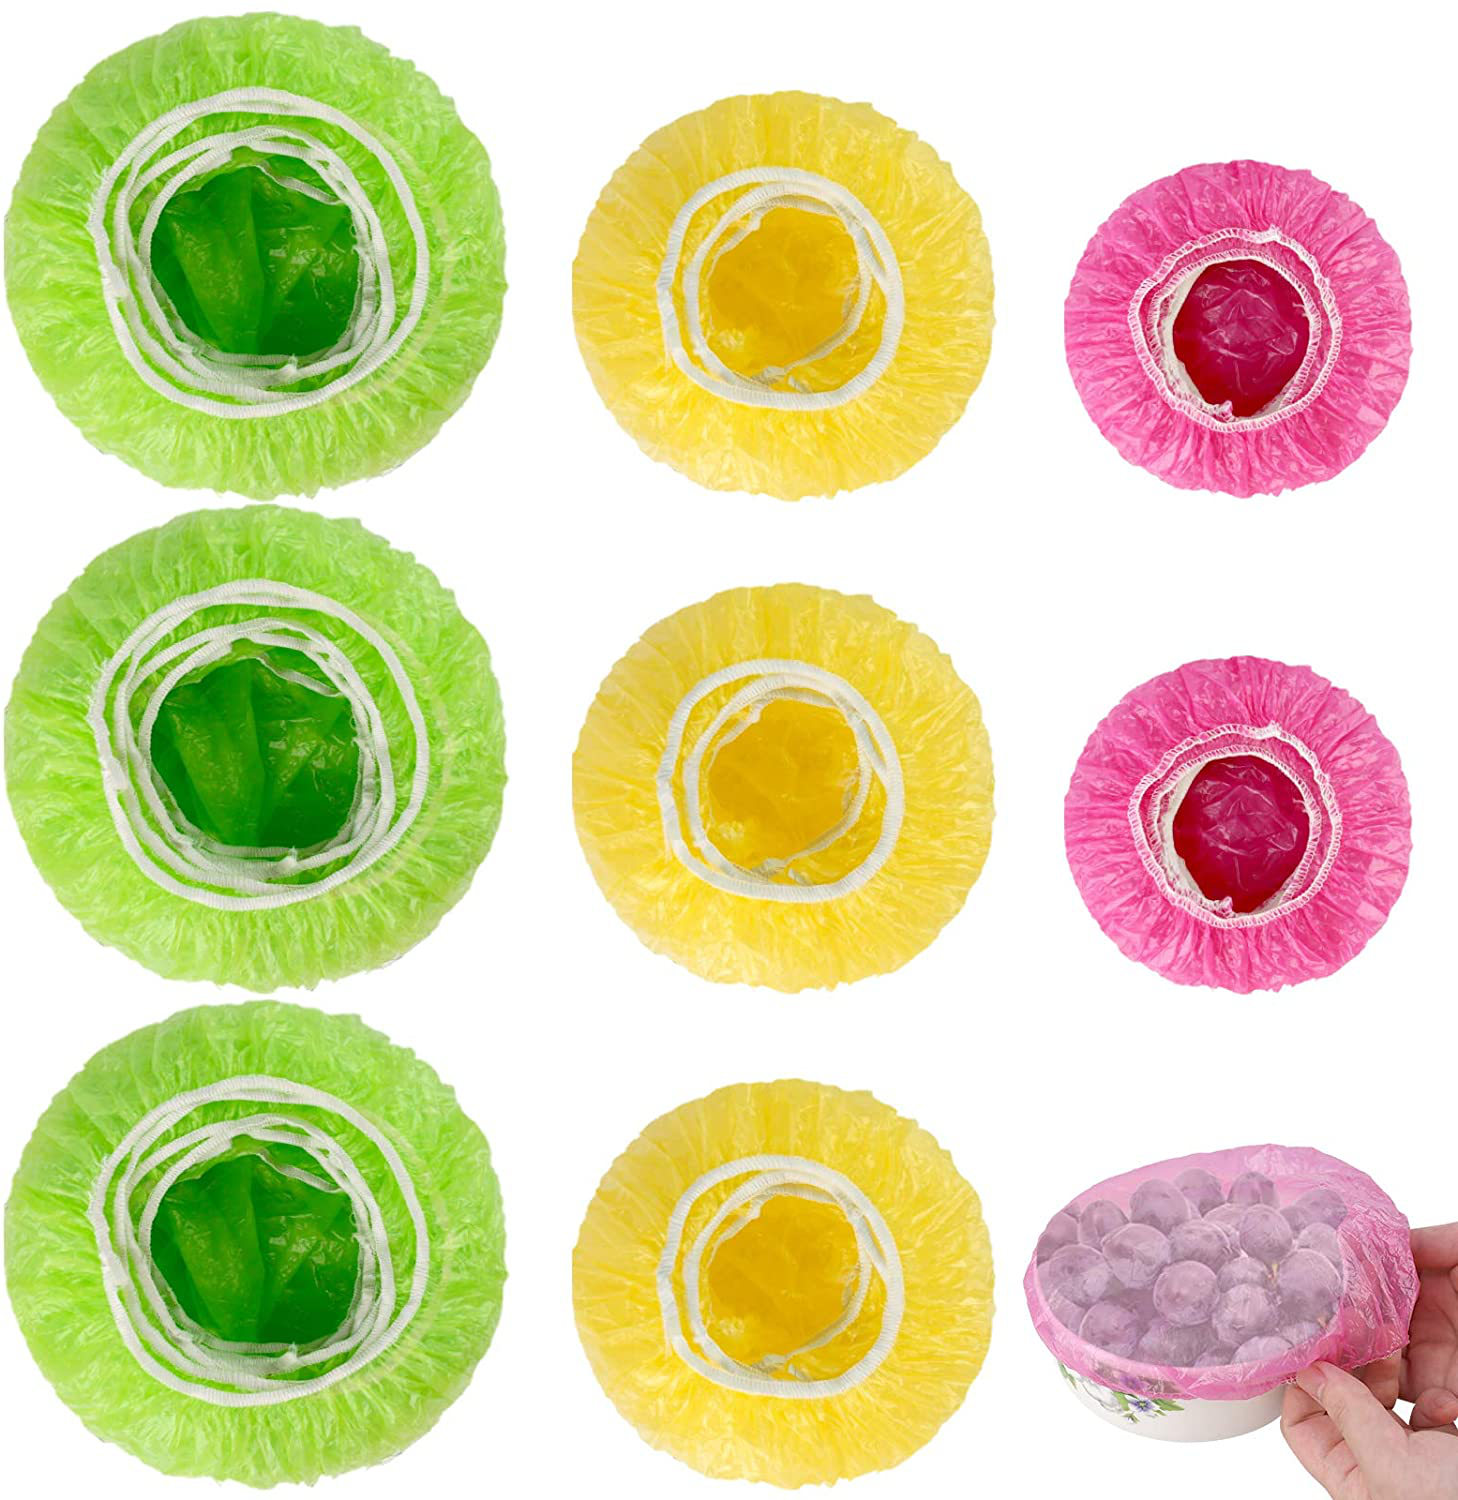 HANSGO Elastic Reusable Food Storage Covers, 120 Pieces 3 Size Plastic Wrap Colorful Bowl Covers Dish Plate Plastic Covers for Family Outdoor Picnic